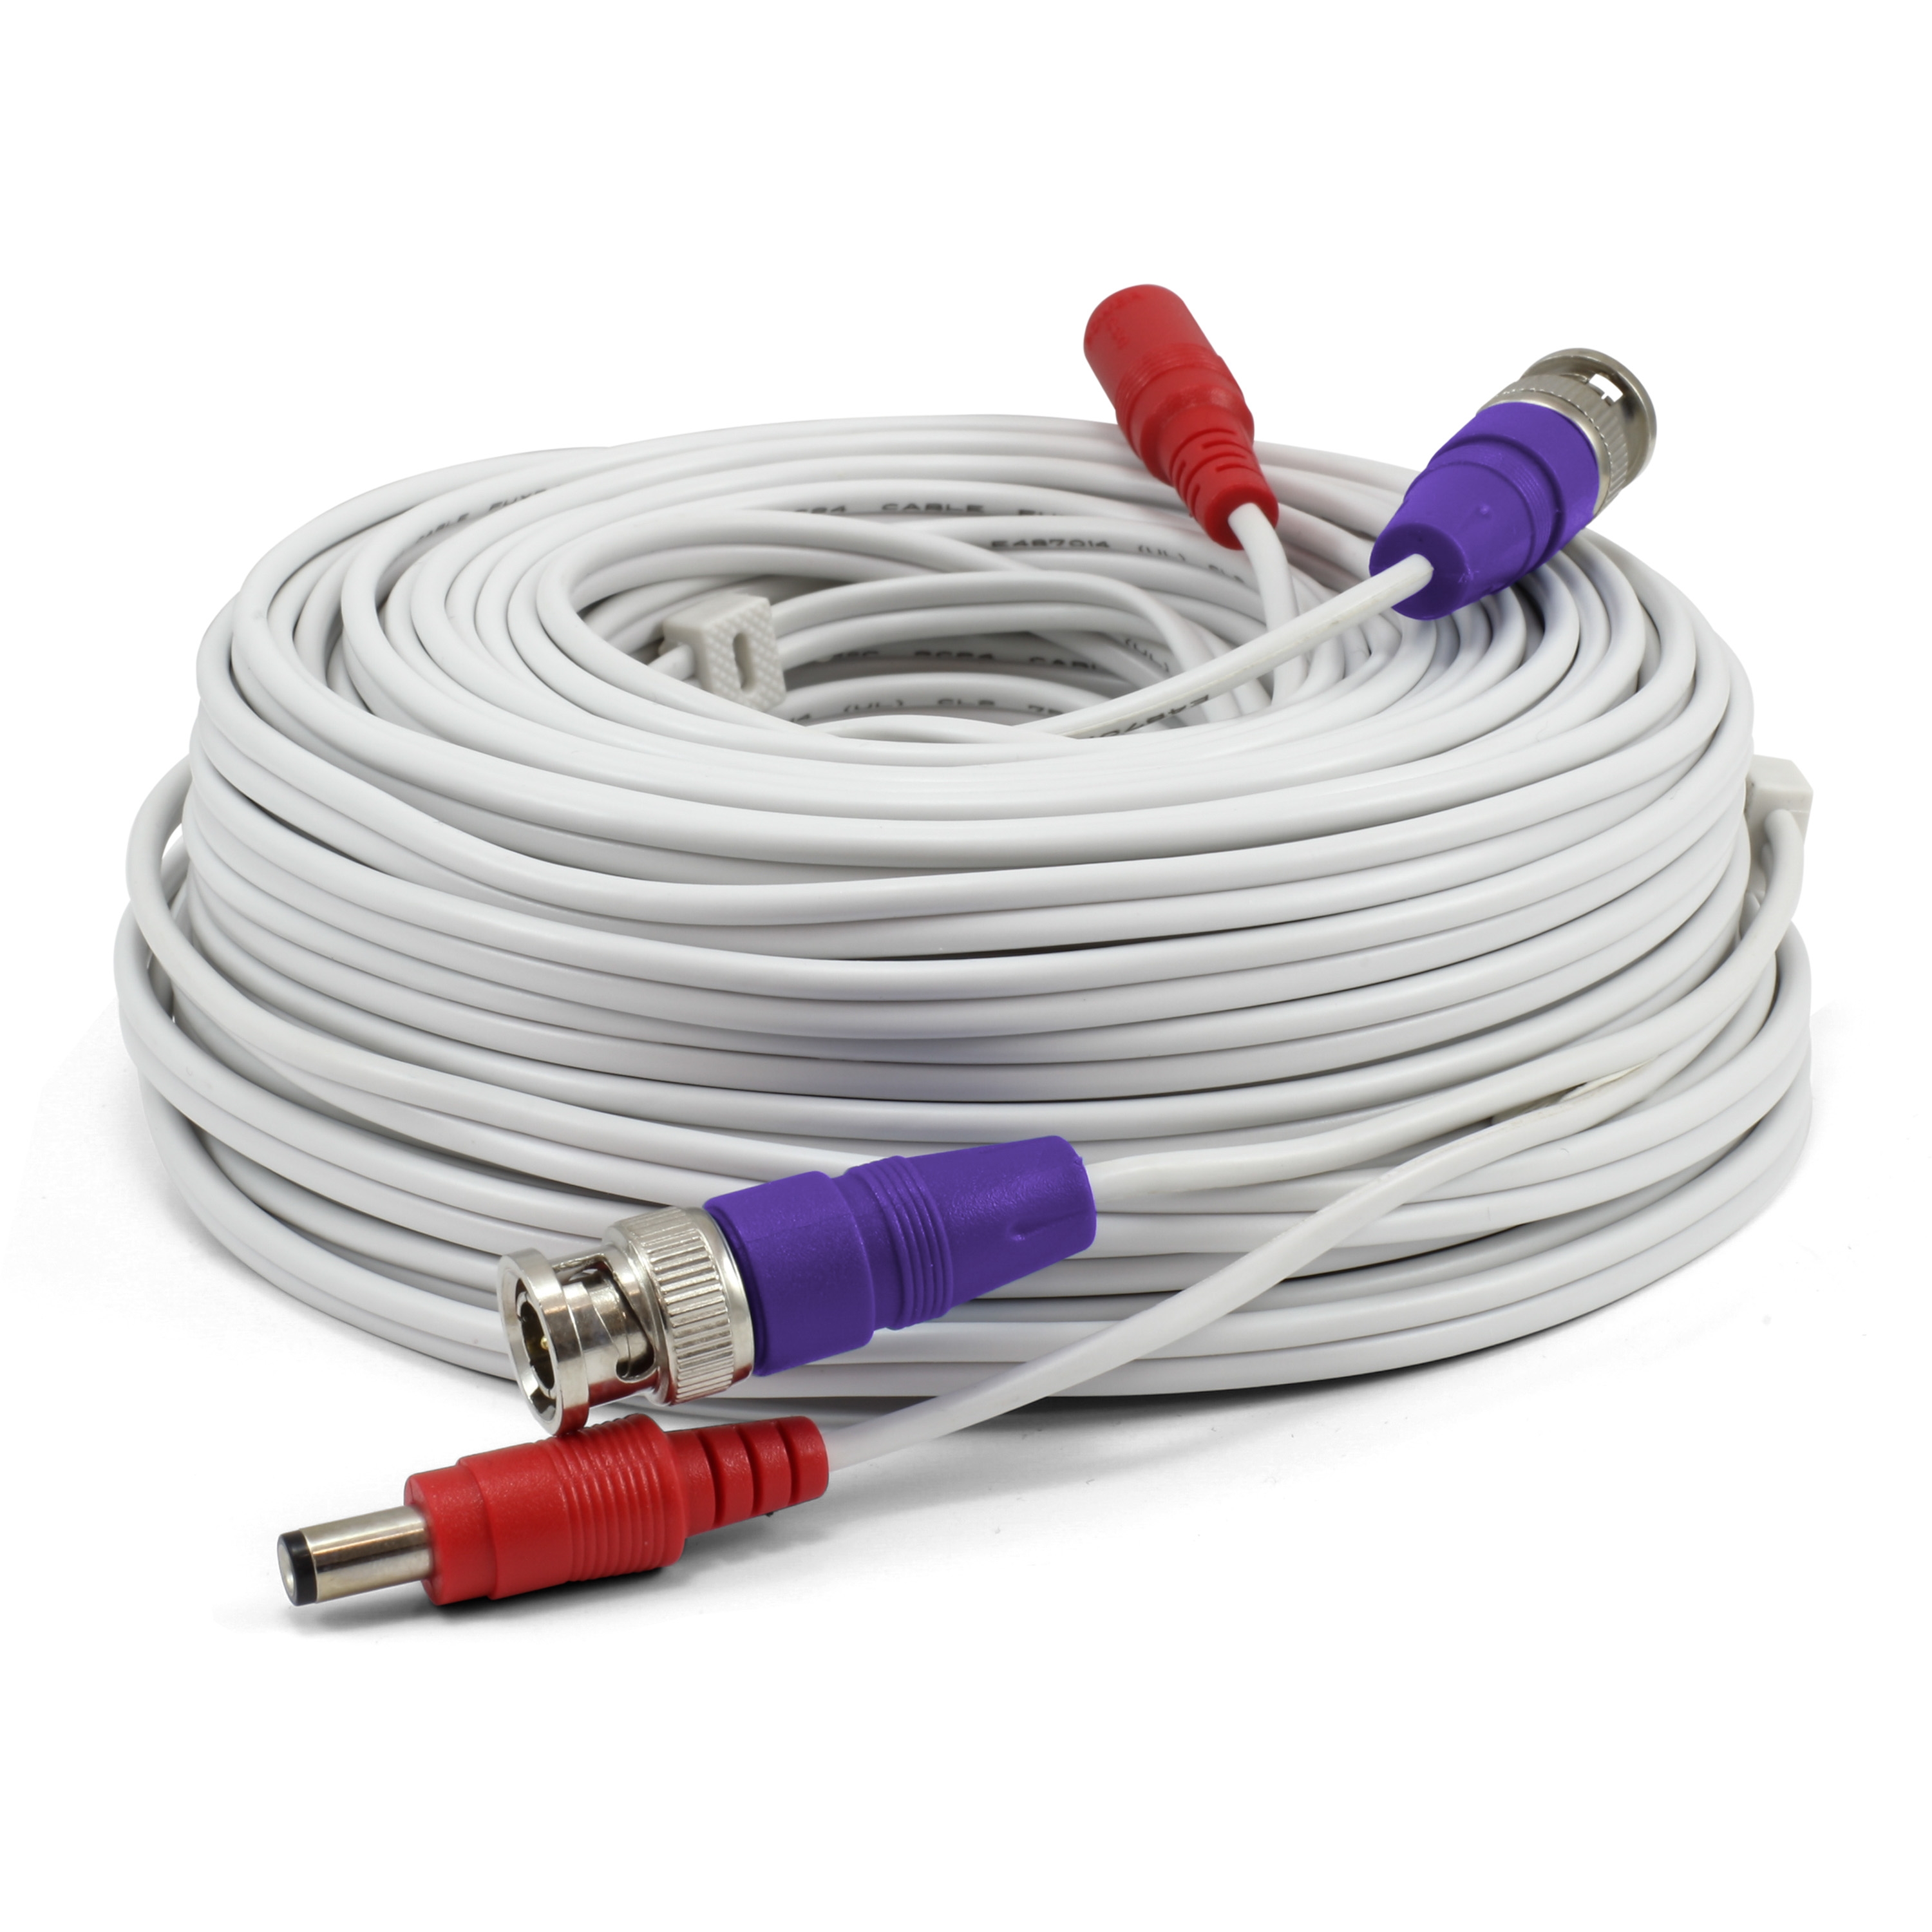 Photos - Cable (video, audio, USB) Swann Security Extension BNC Cable 100ft/30m SWPRO-30ULCBL 